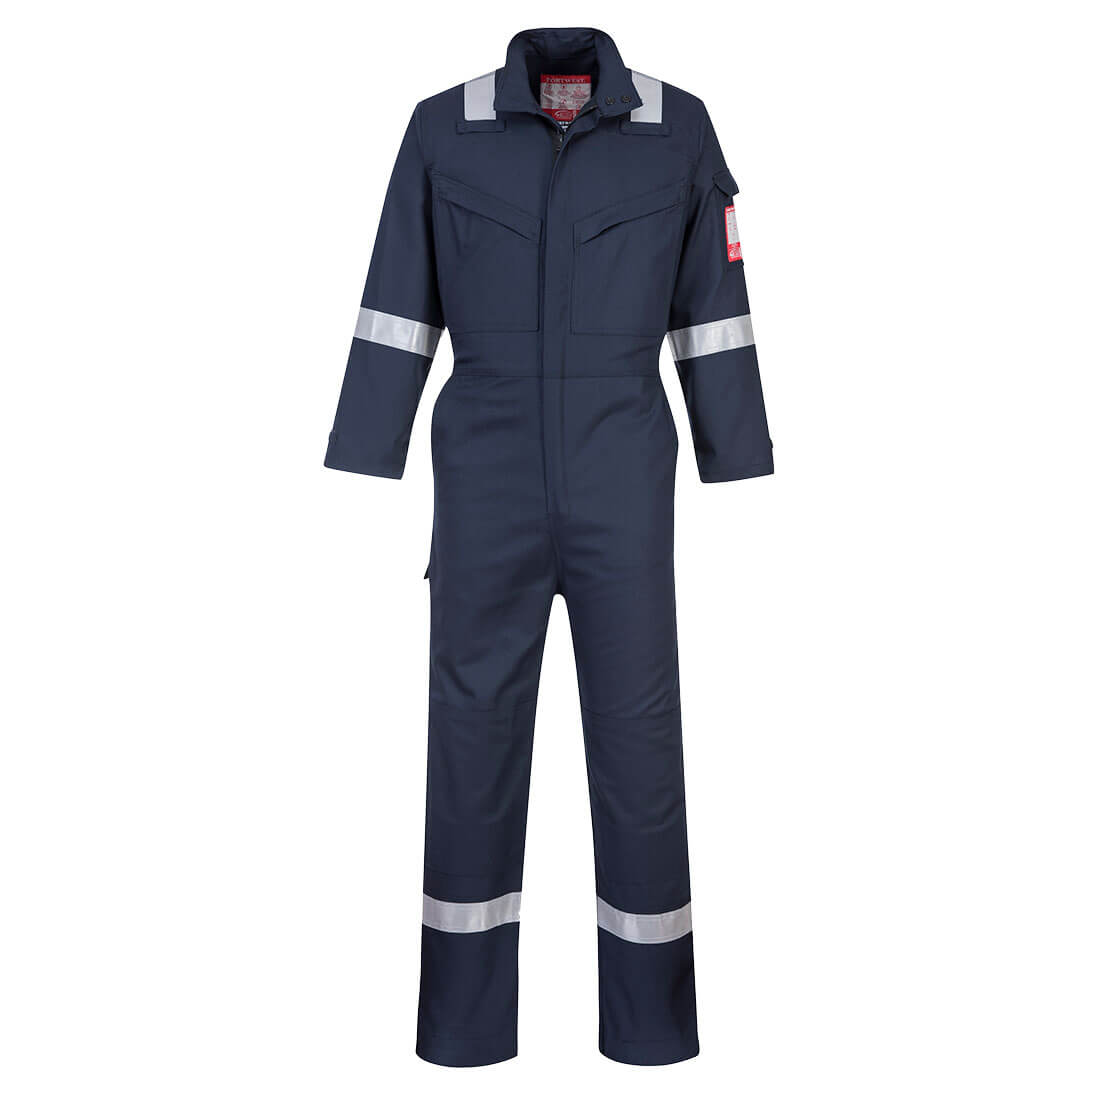 BizFlame Ultra™ Fireproof Electric Arc Coverall